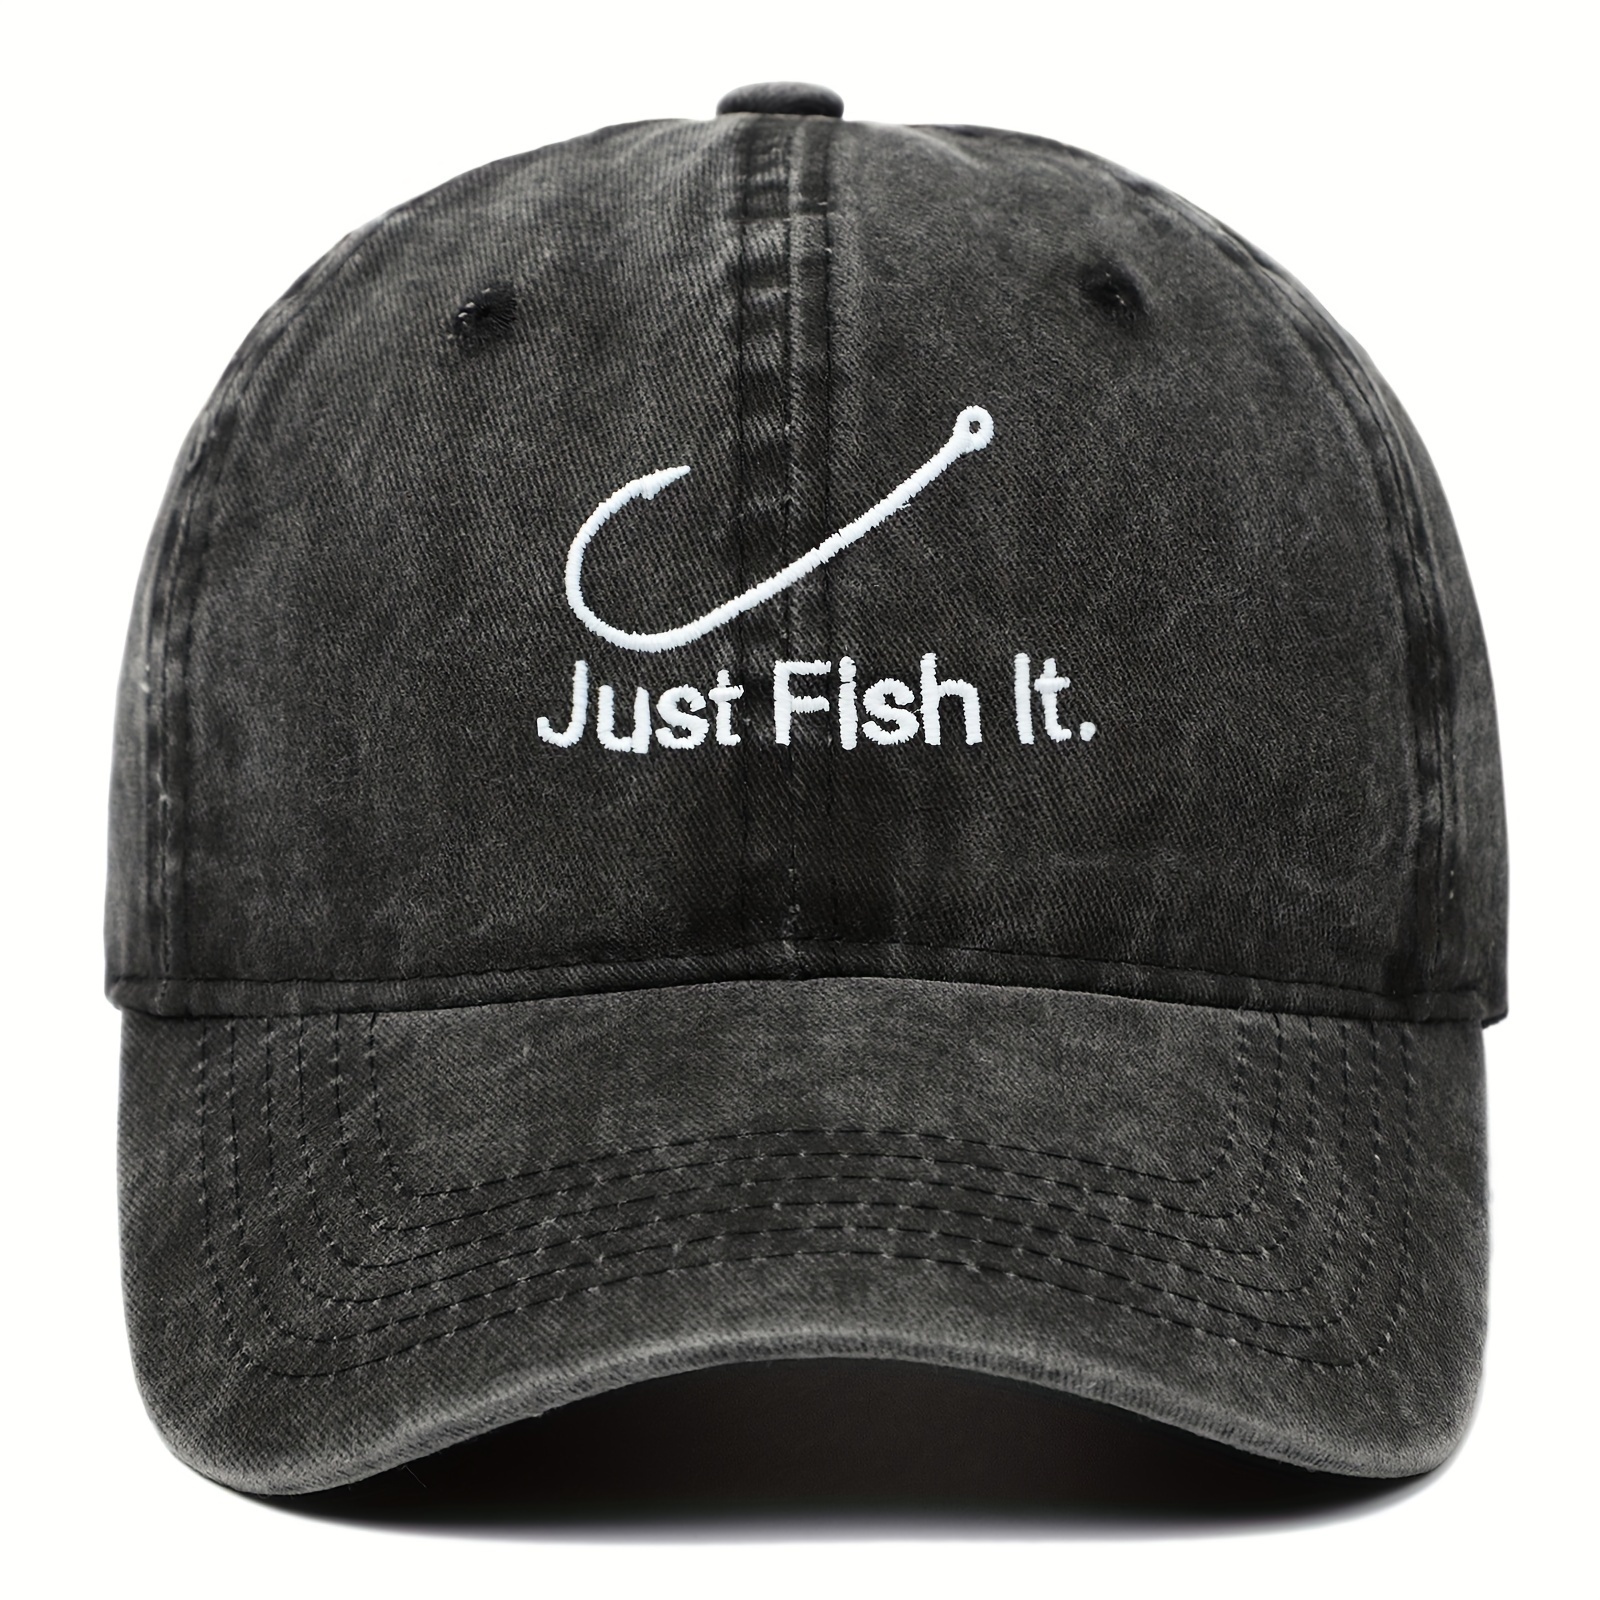 

Just Fish It Letter Embroidery Washed Baseball Cap, Unisex Cotton Uv Protection Lightweight Duckbill Cap, For Outdoor Activities